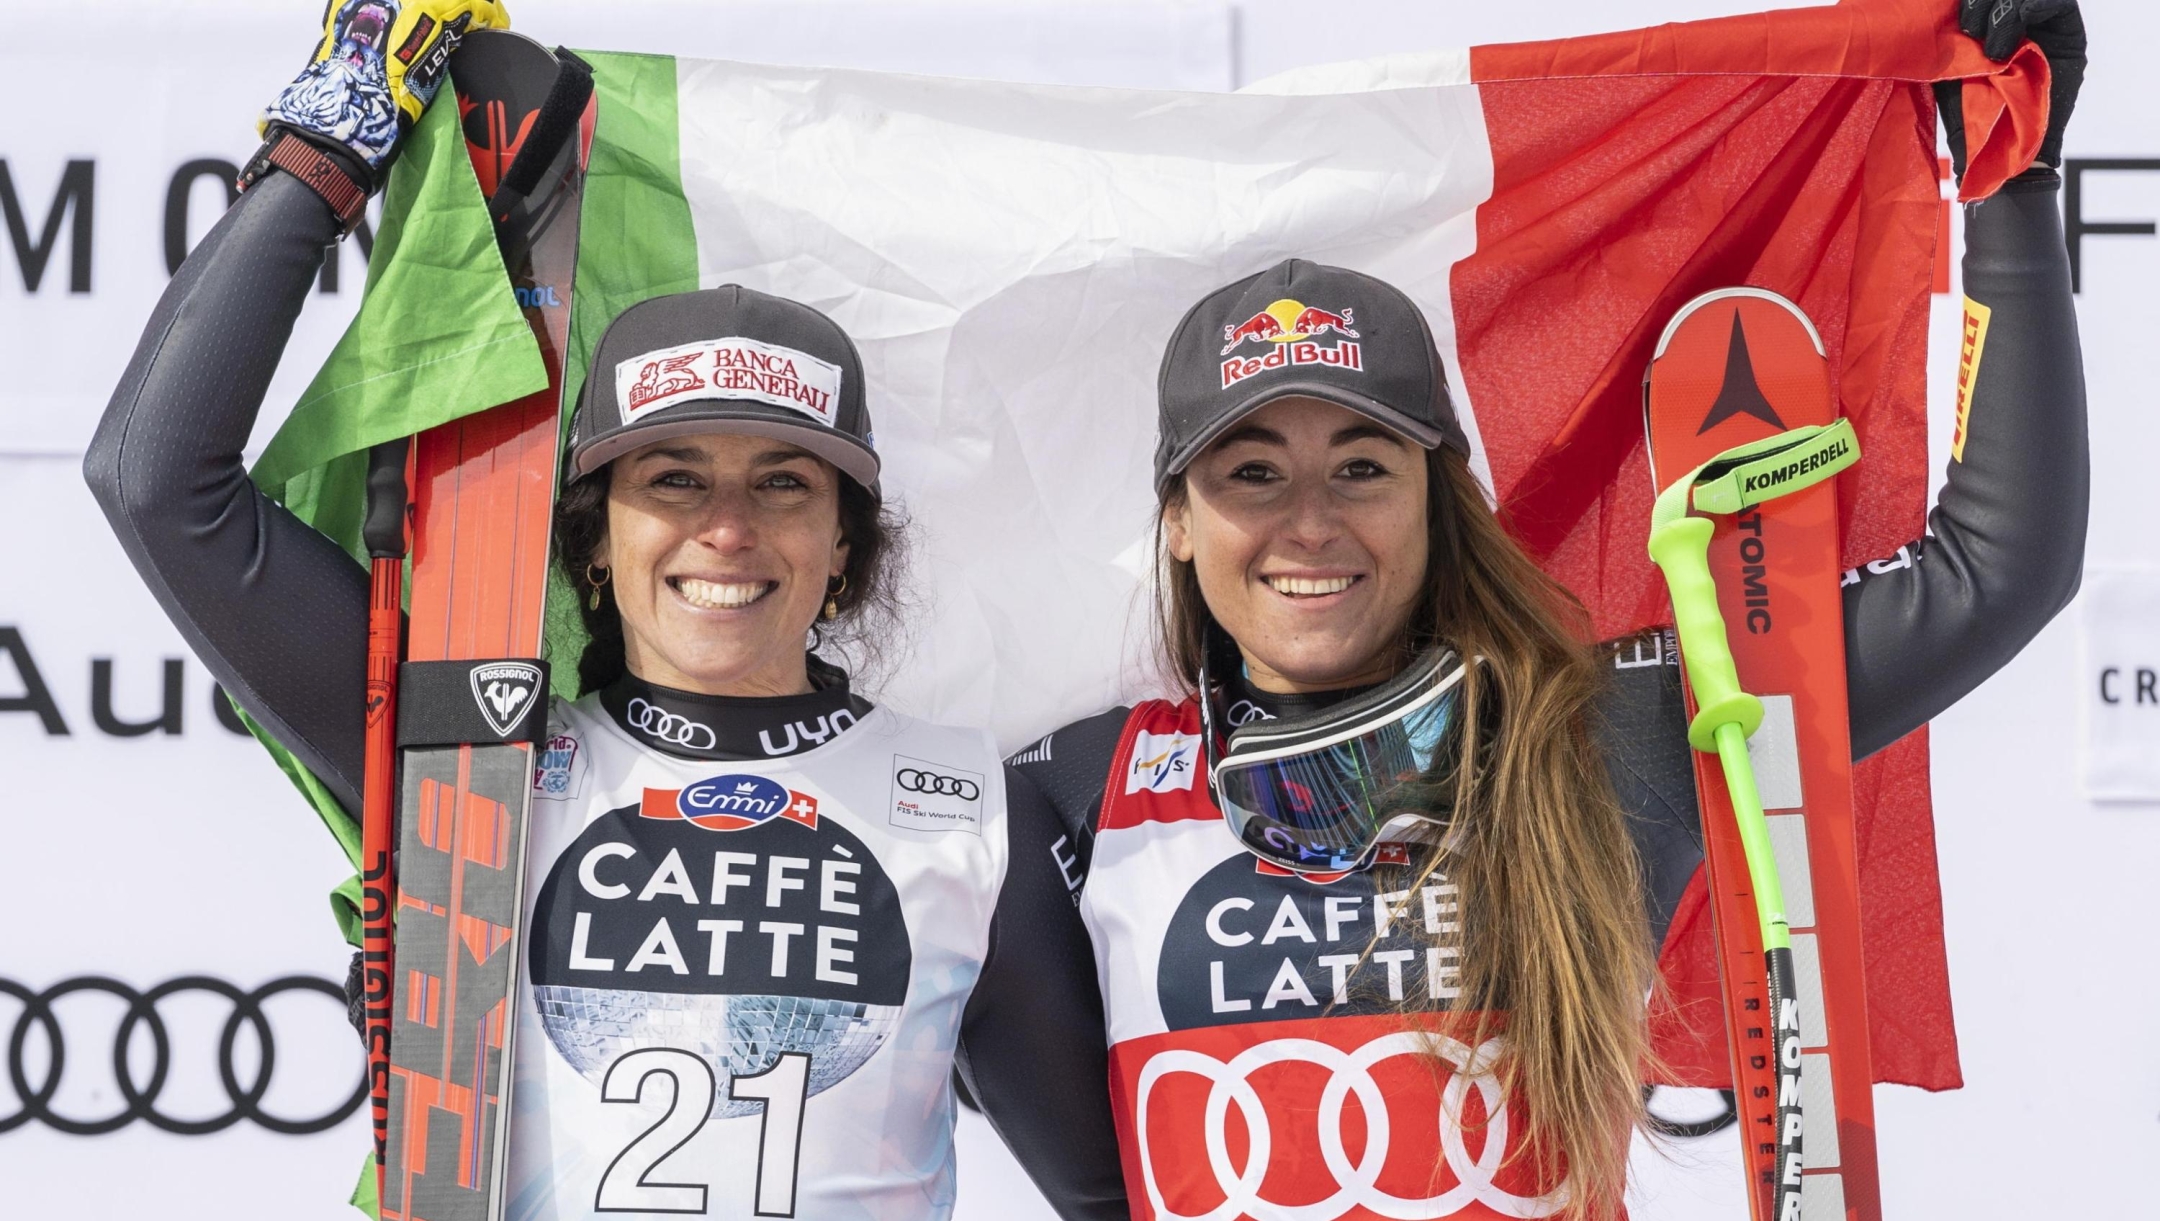 epa10492112 Sofia Goggia of Italy, right, celebrates as the winner with Federica Brignone also of Italy, during the podium ceremony after the women's Downhill race at the FIS Alpine Ski World Cup in Crans-Montana, Switzerland, 26 February 2023.  EPA/ALESSANDRO DELLA VALLE